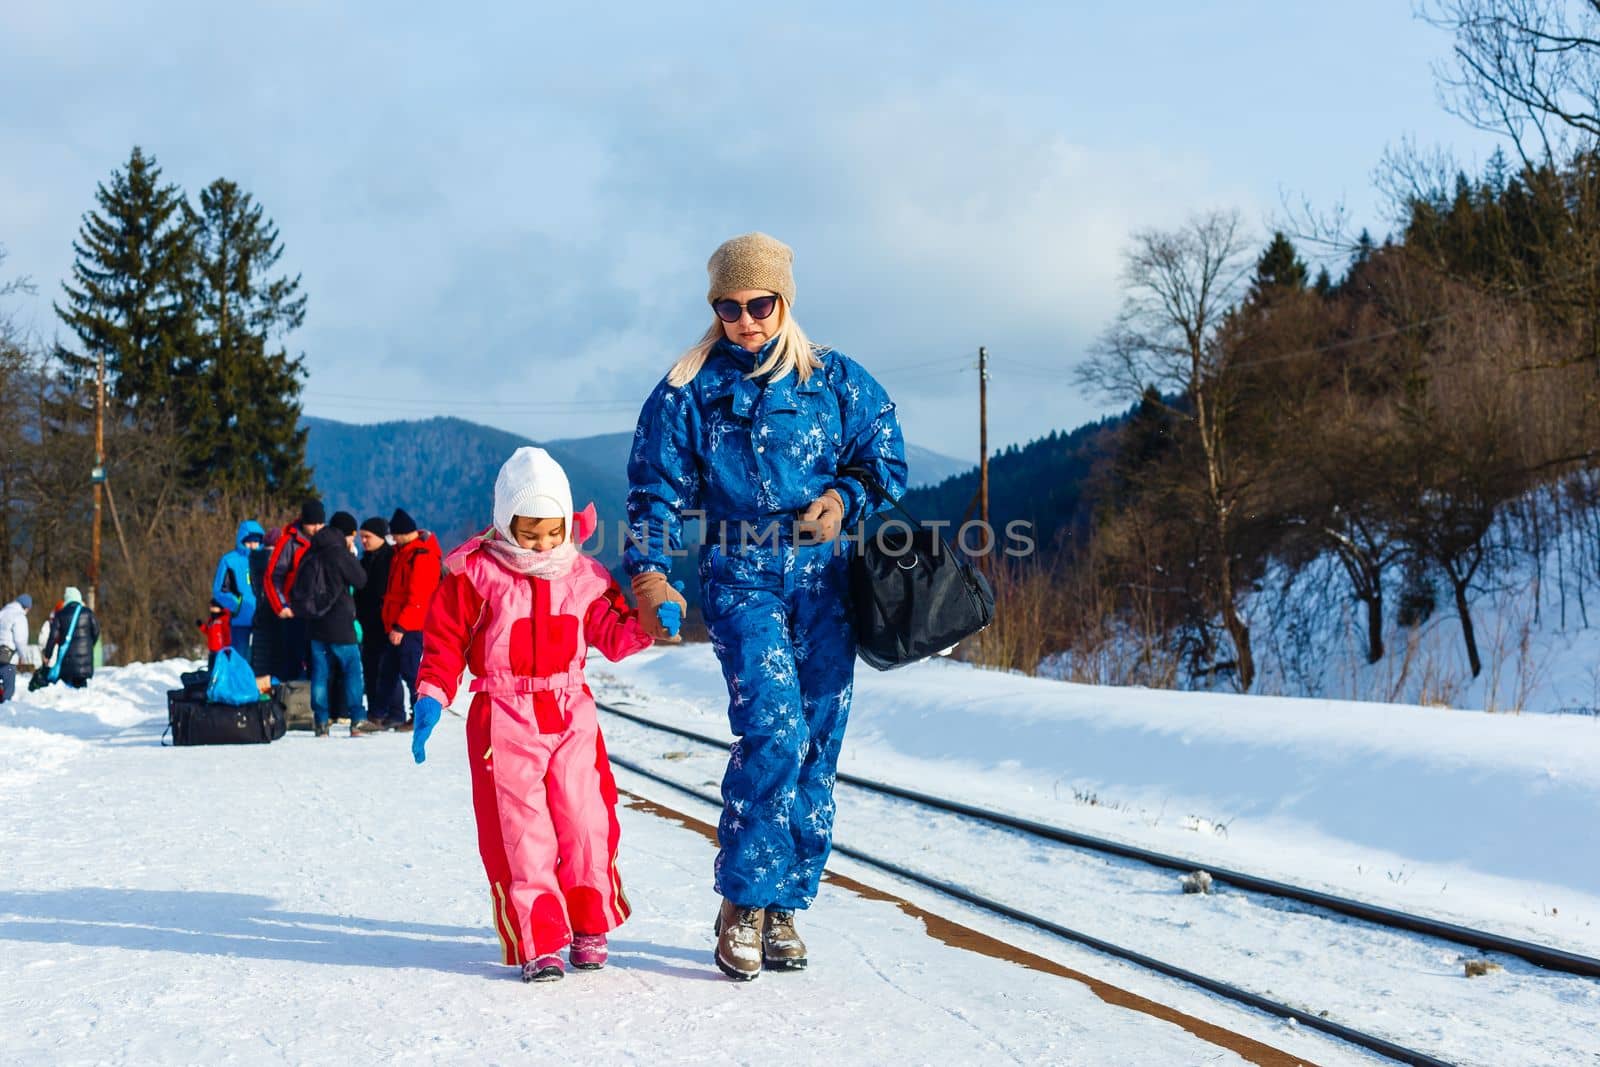 A woman waits with her daughter after heavy snowfall for her train to arrive. by Andelov13